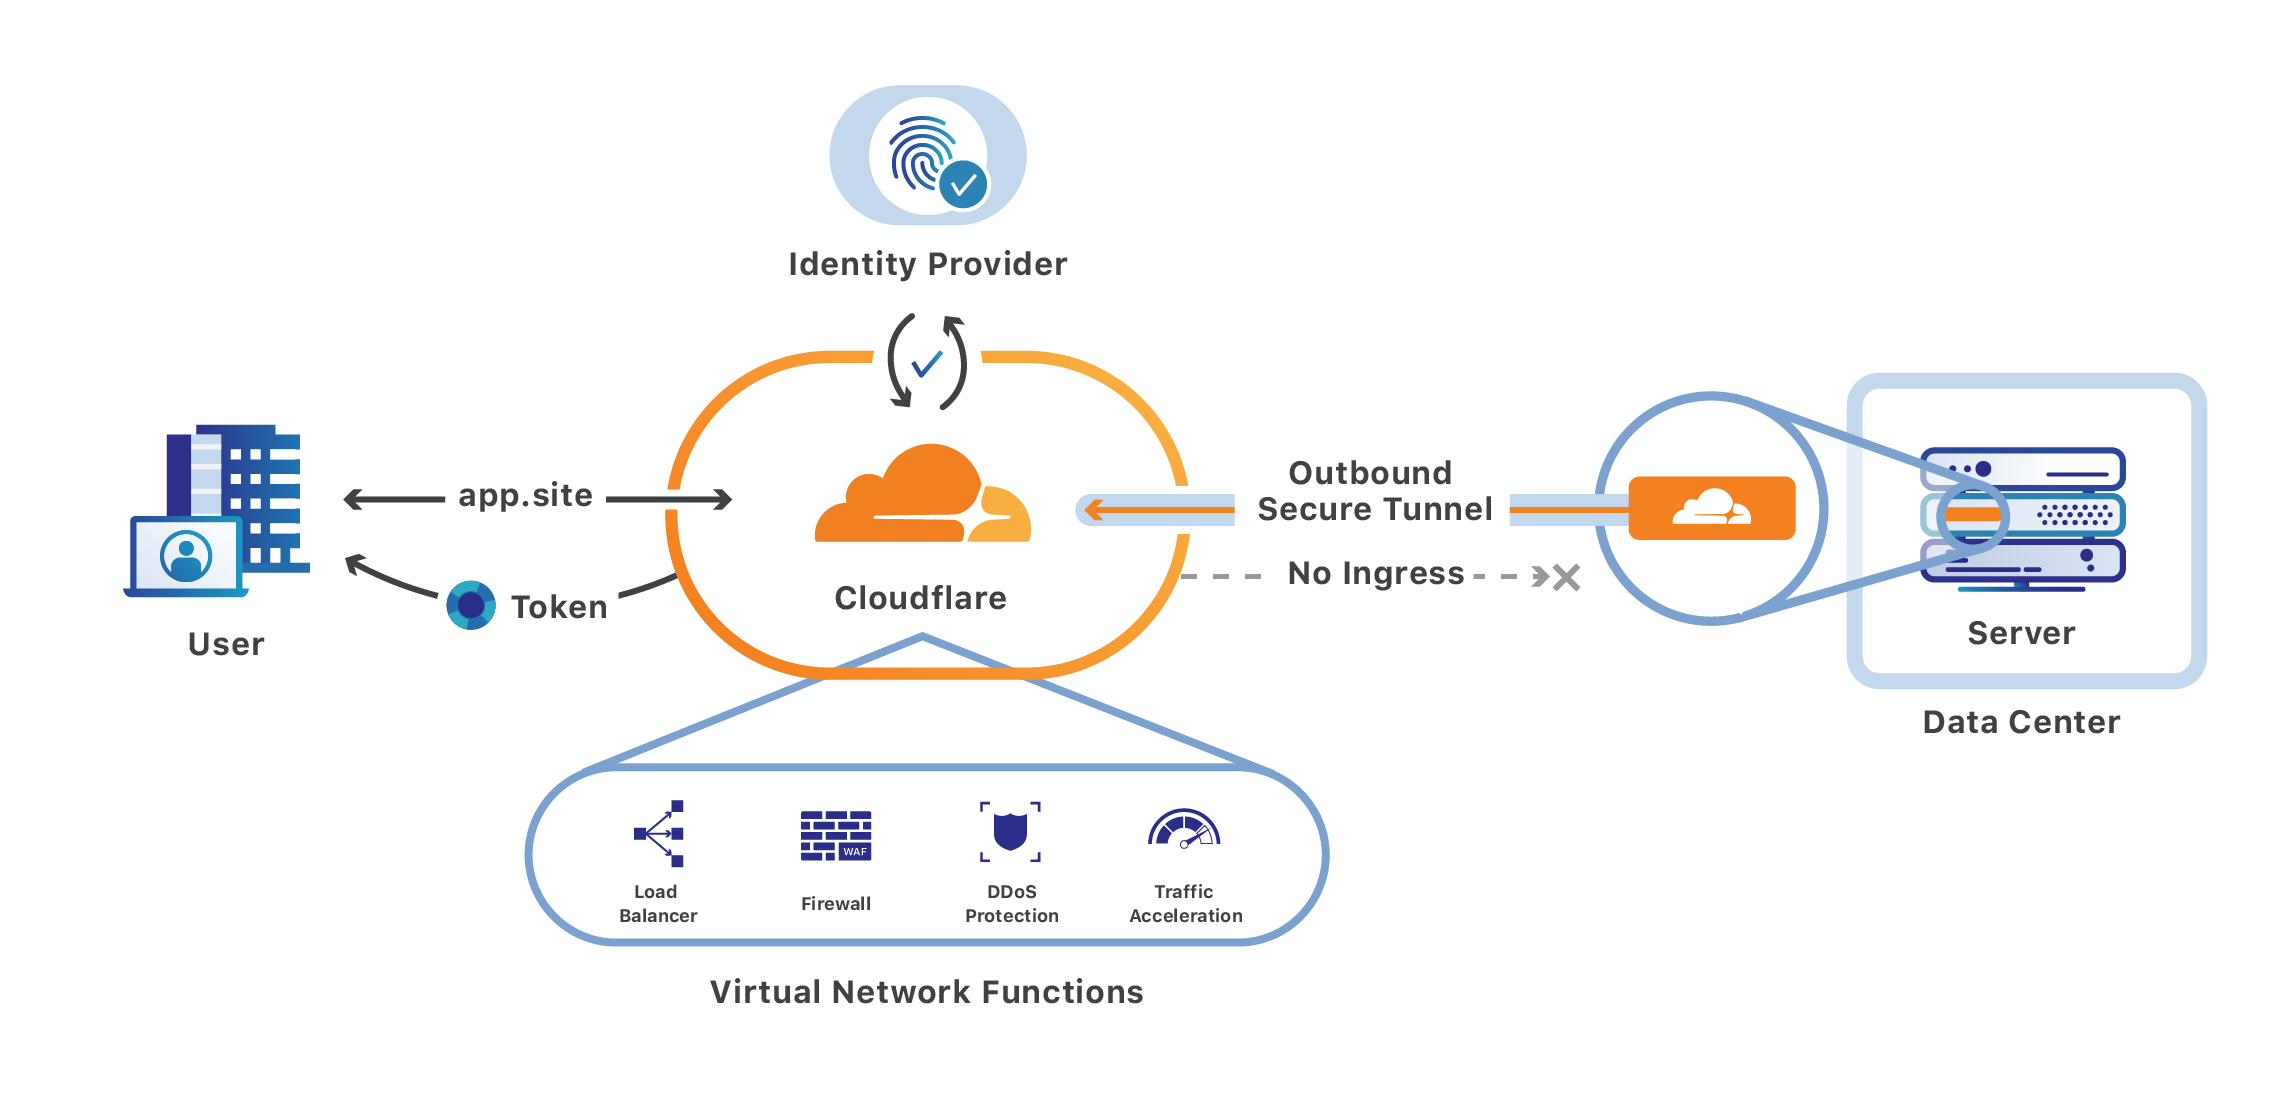 Cloudflare Access authenticates users to your internal applications.